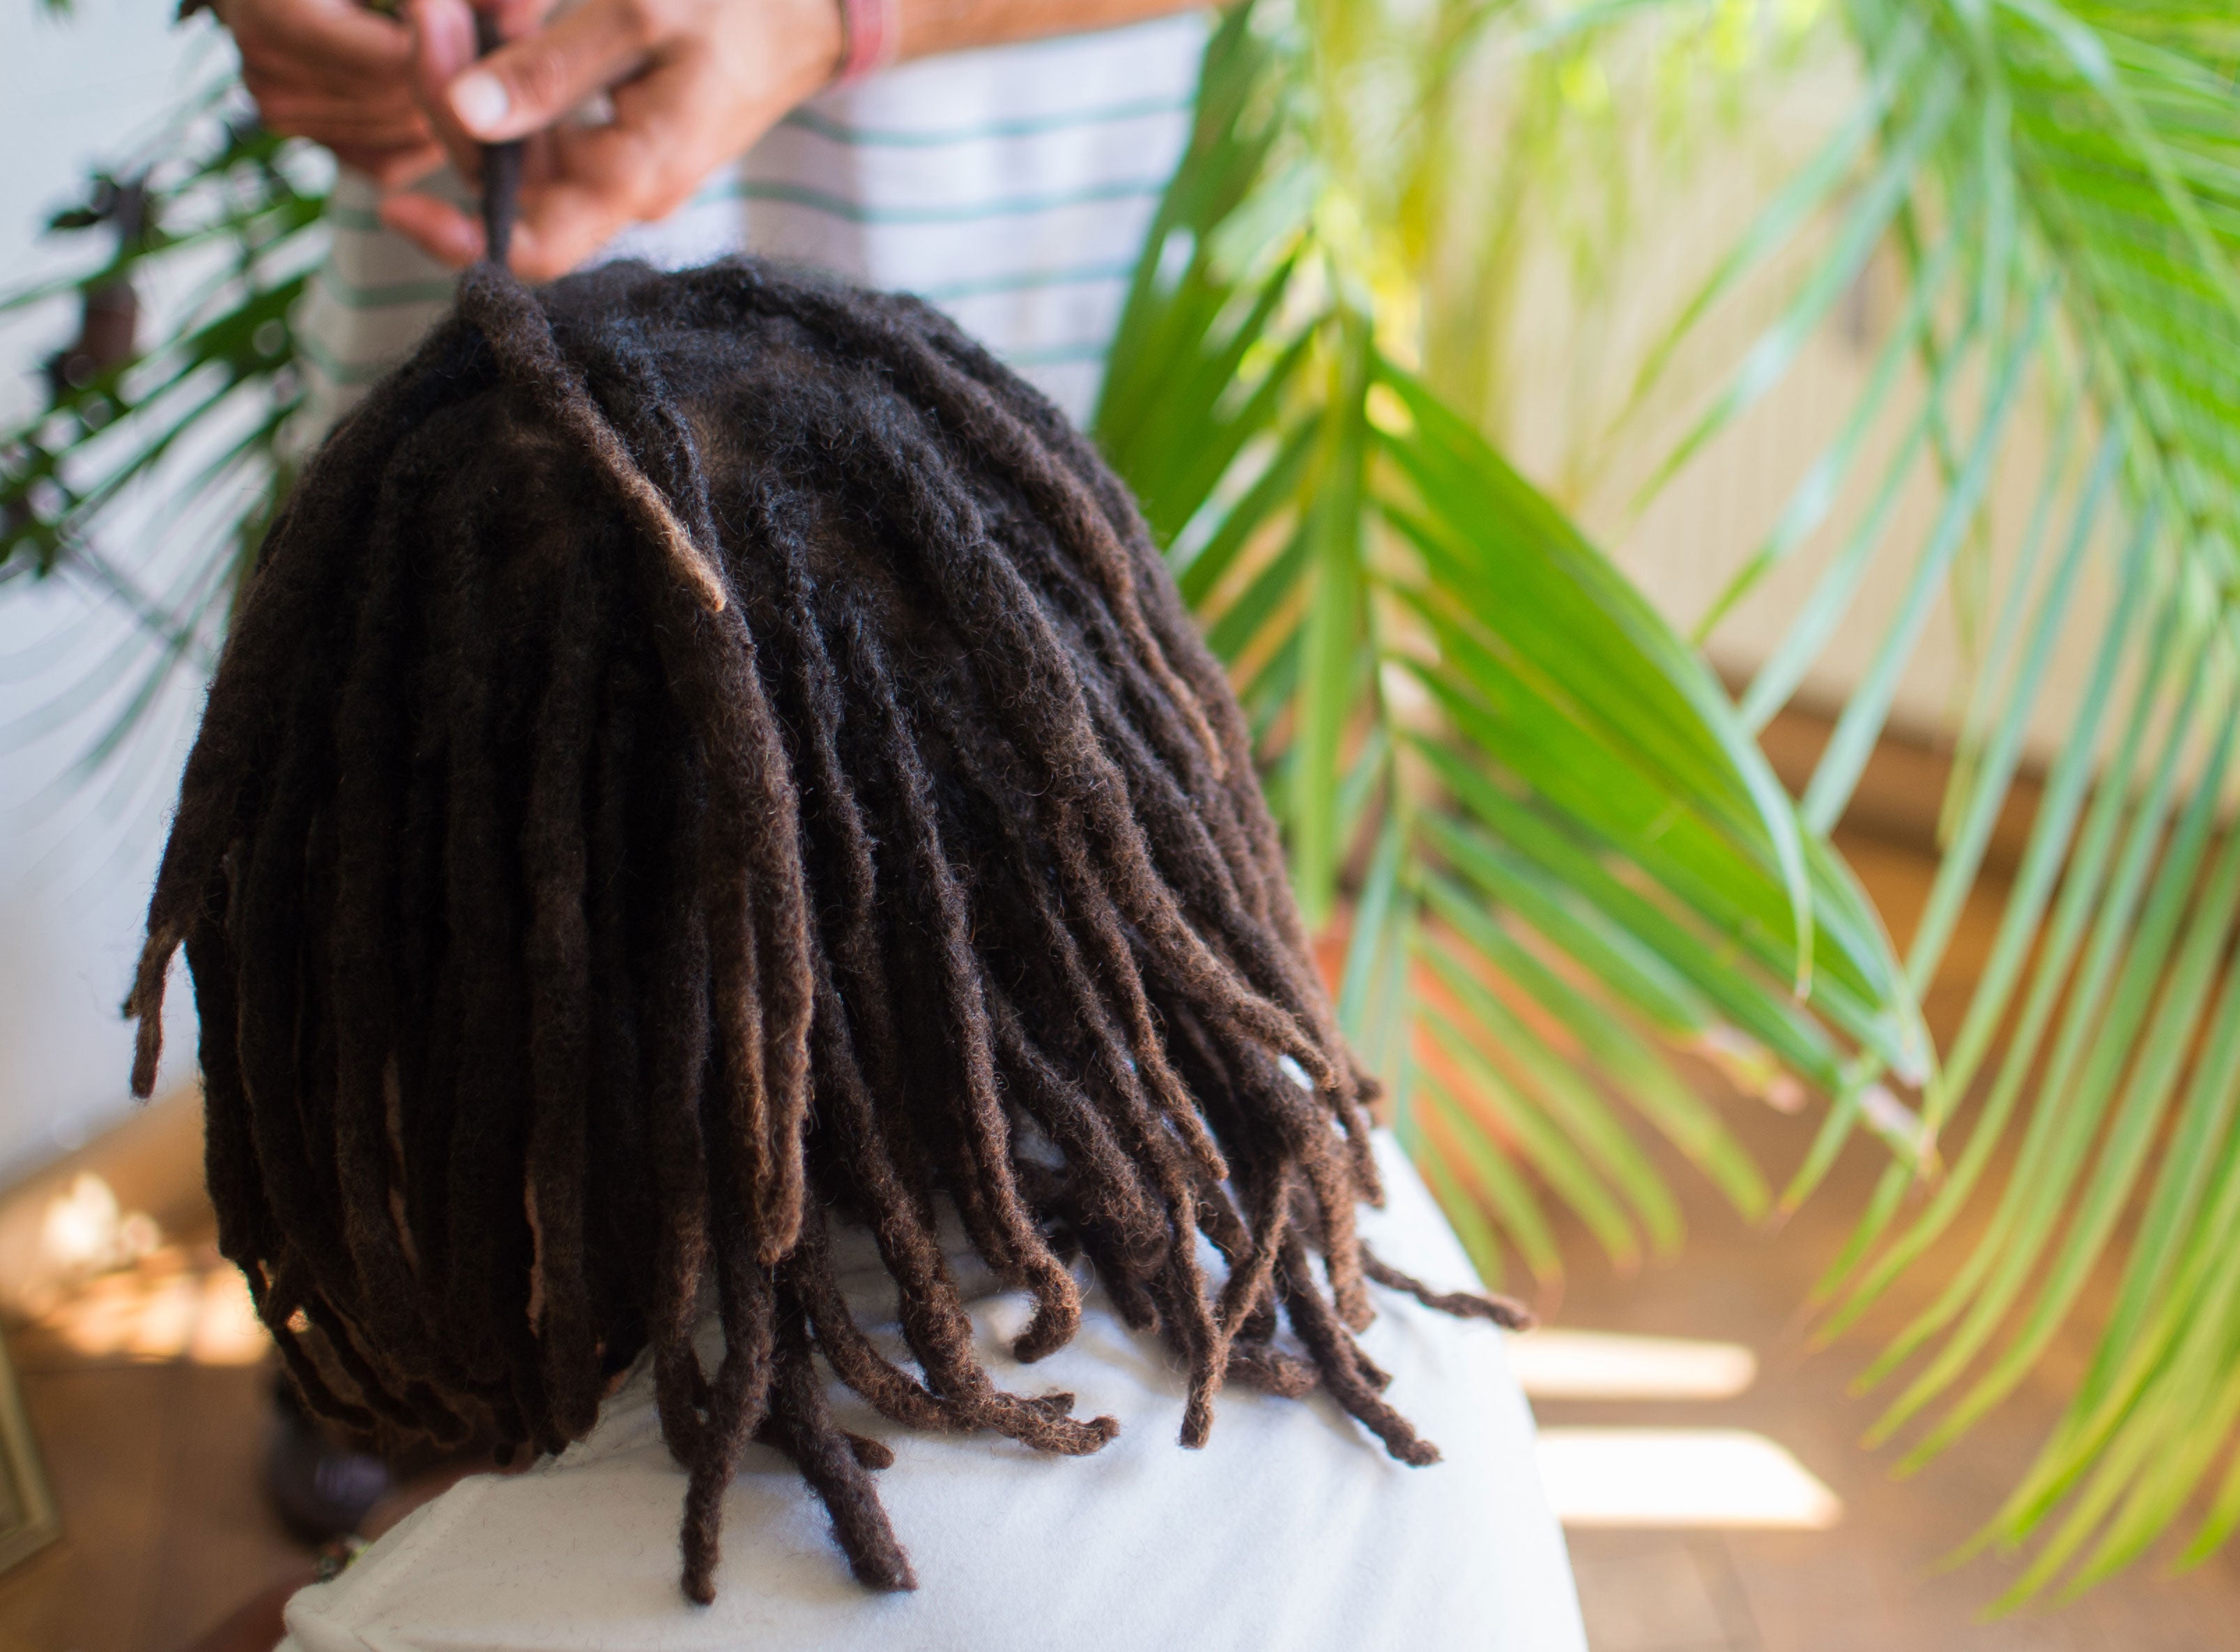 Why The #ProfessionalLocs Hashtag Still Matters
